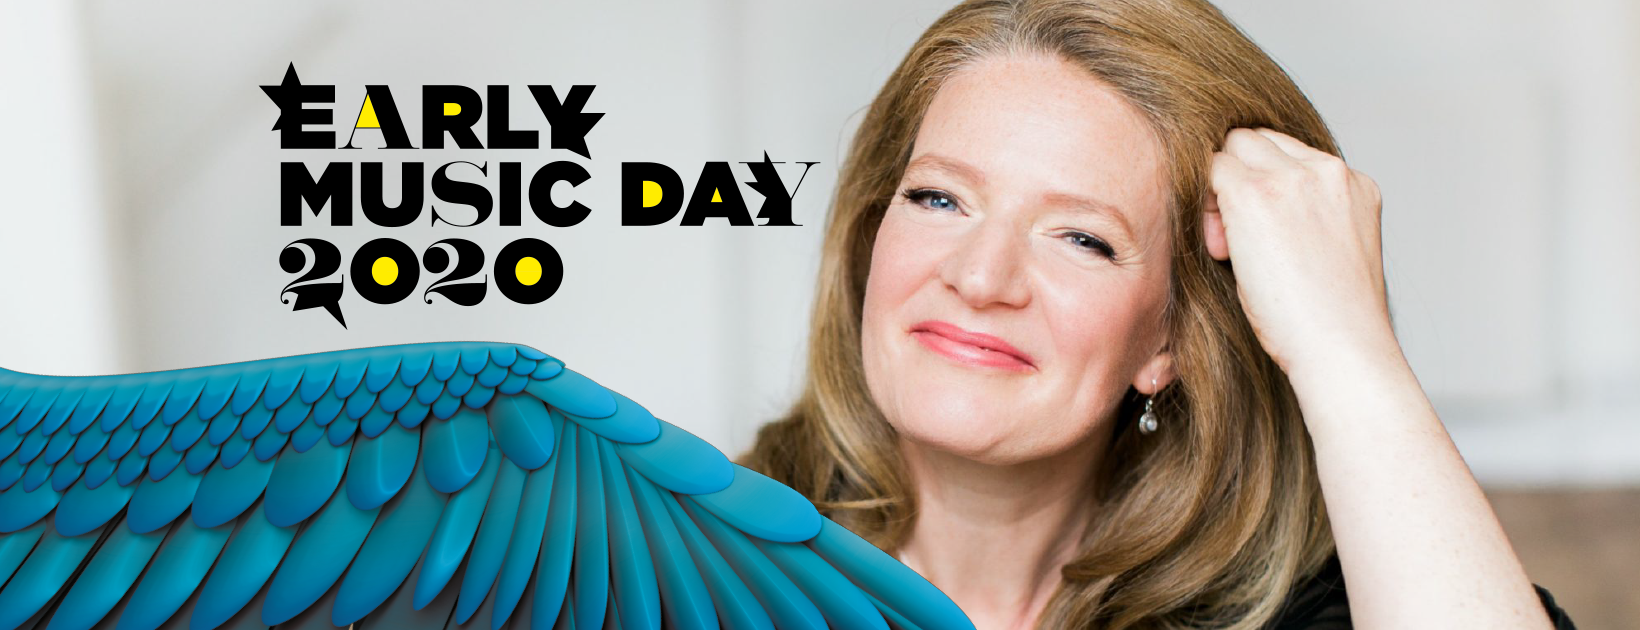 REMA Early Music Day 2020